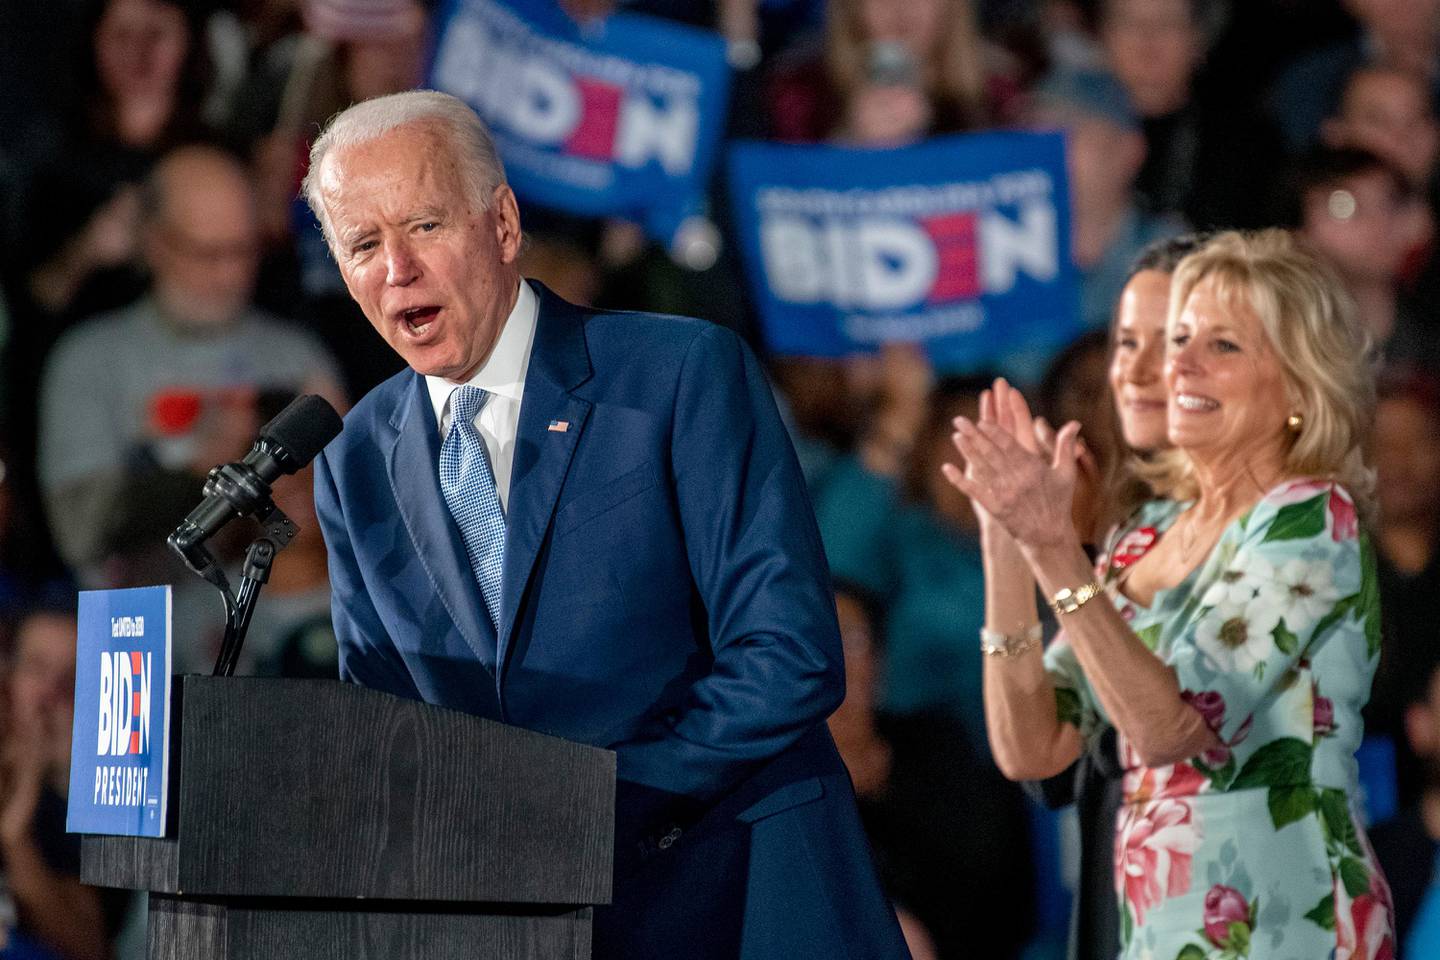 Democratic presidential candidate and former Vice President Joe Biden speaks as his wife Jill Biden, far right, and daughter Ashley stand by during his primary election night rally in Columbia, S.C., Saturday, Feb. 29, 2020, after winning the South Carolina primary. (Tom Gralish/The Philadelphia Inquirer via AP)